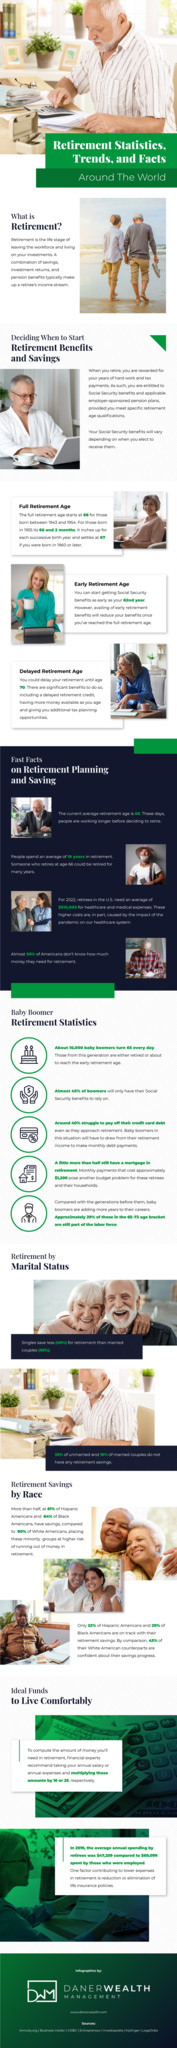 Retirement Statistics Infographic For Industry Today, Industry Today